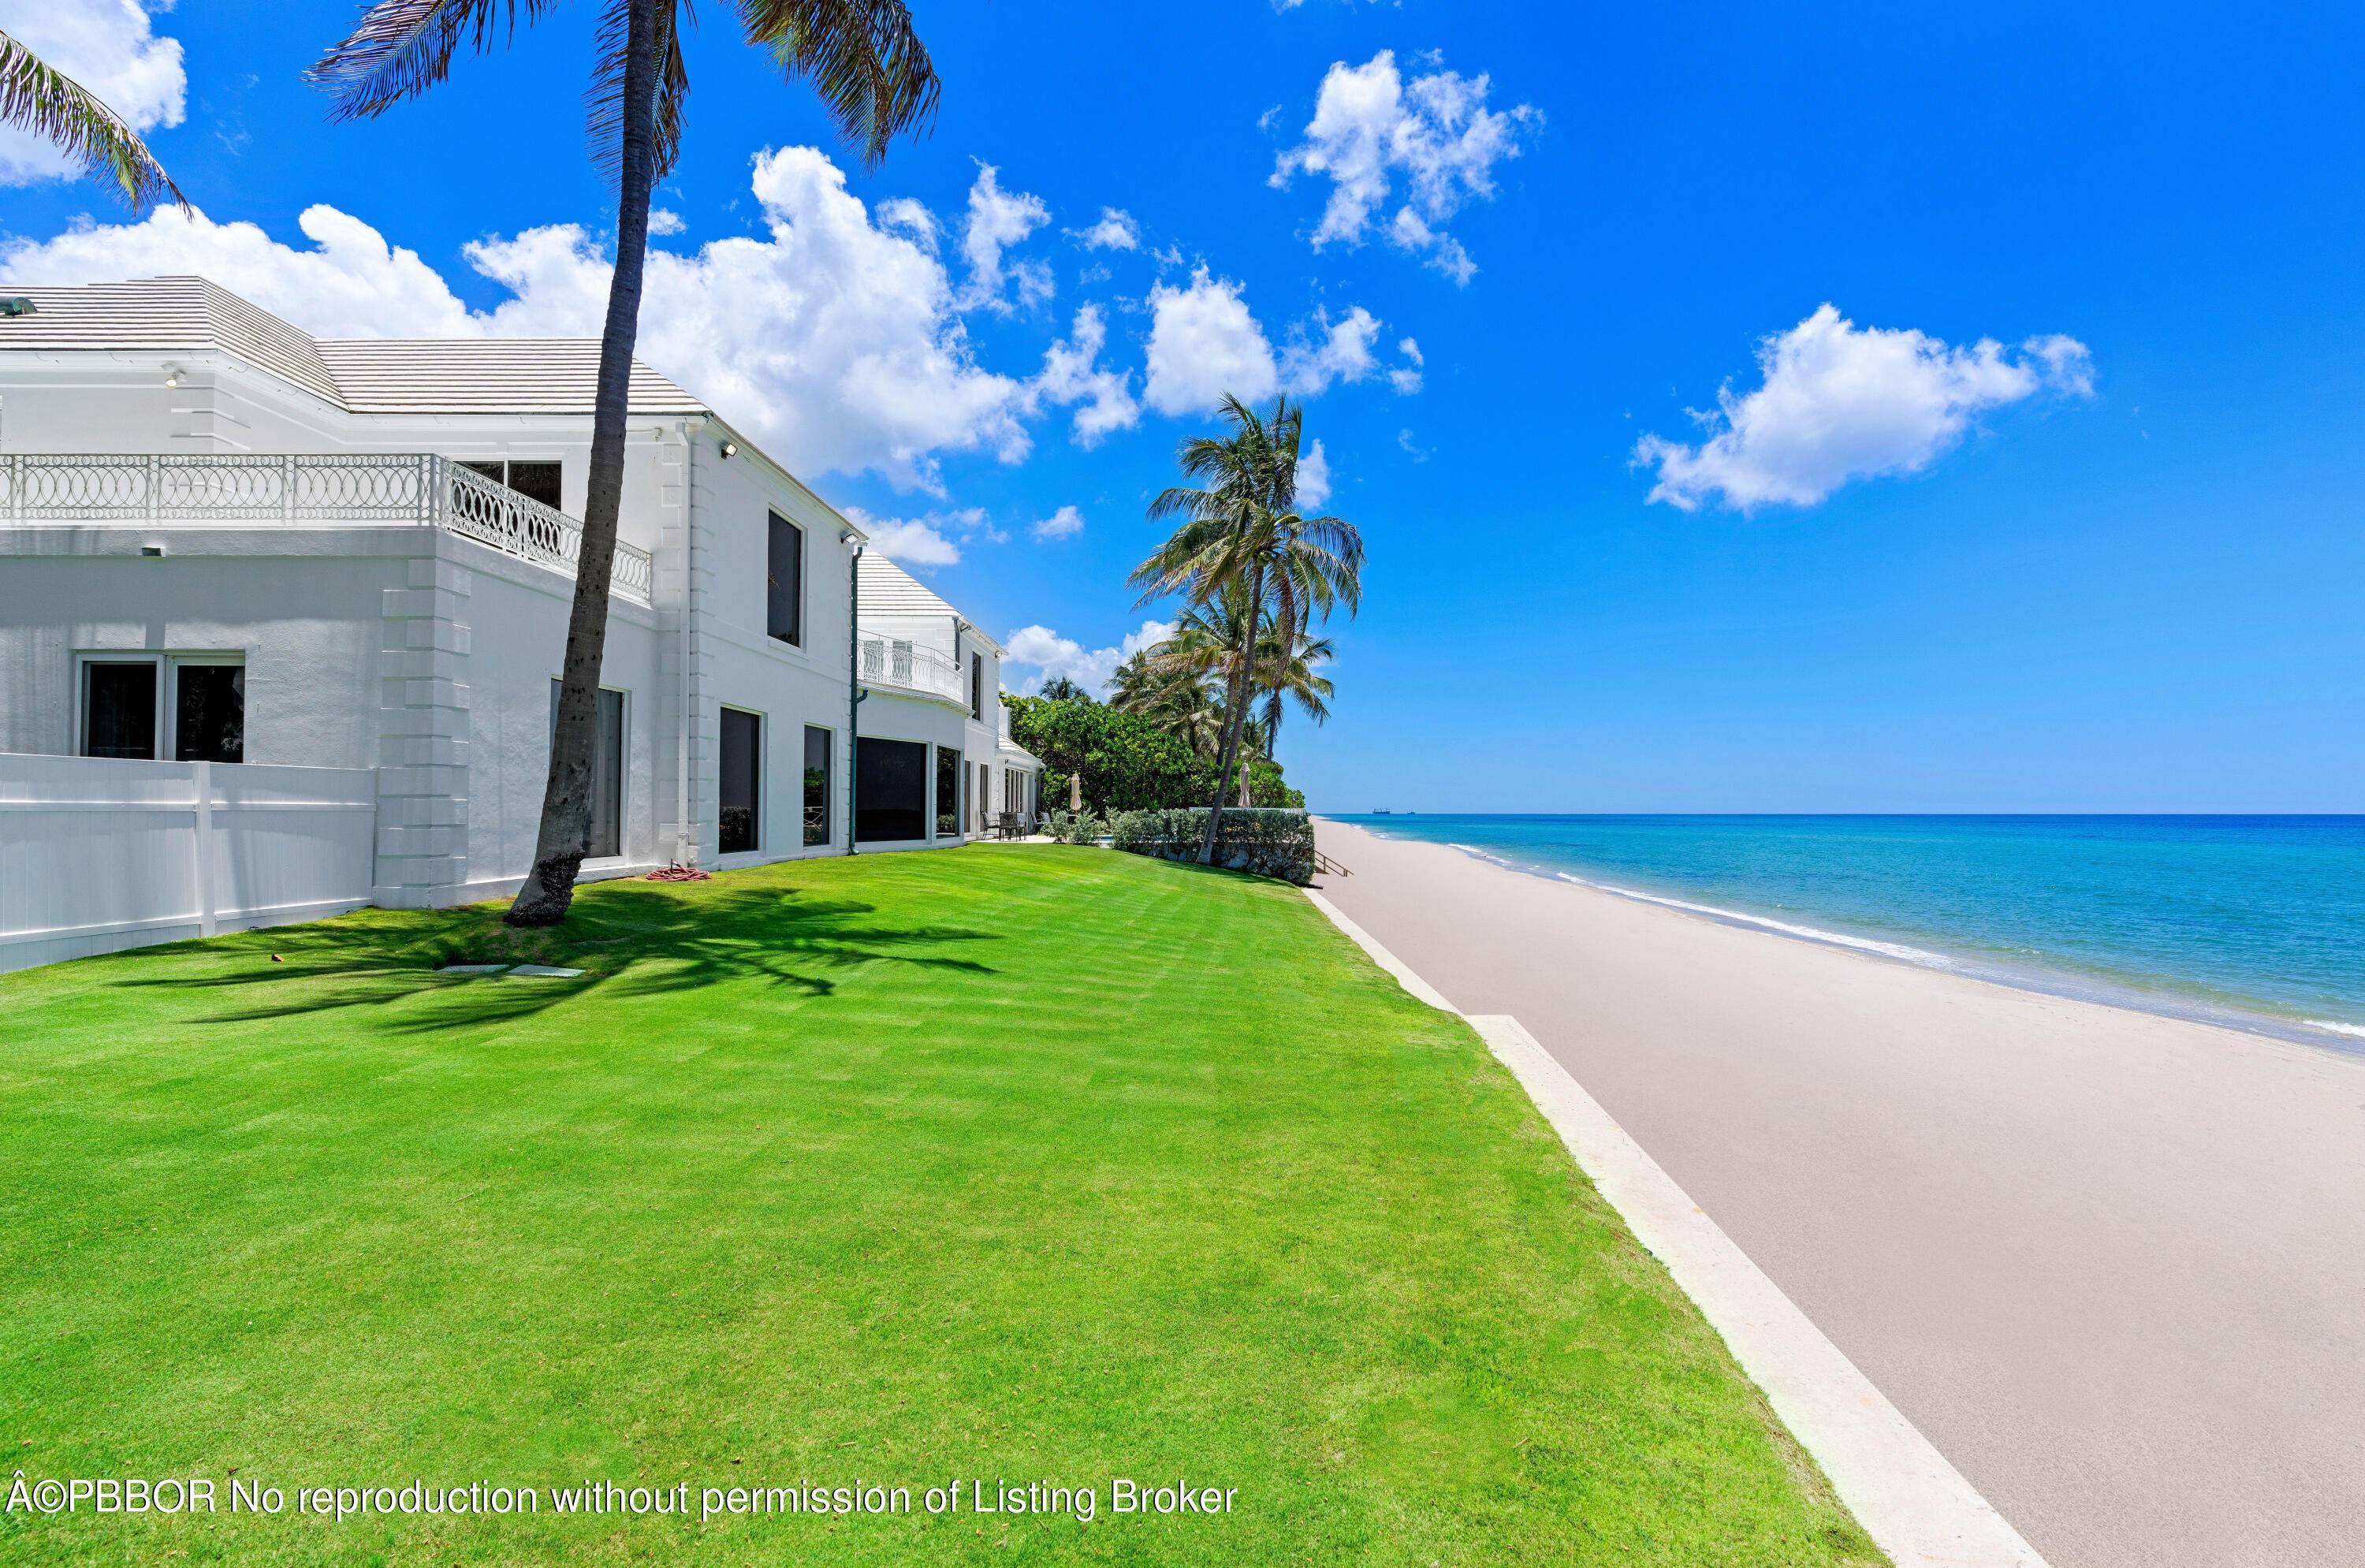 Welcome to the Beach House, one of the most desirable oceanfront homes not only on Palm Beach Island but also anywhere in South Florida.